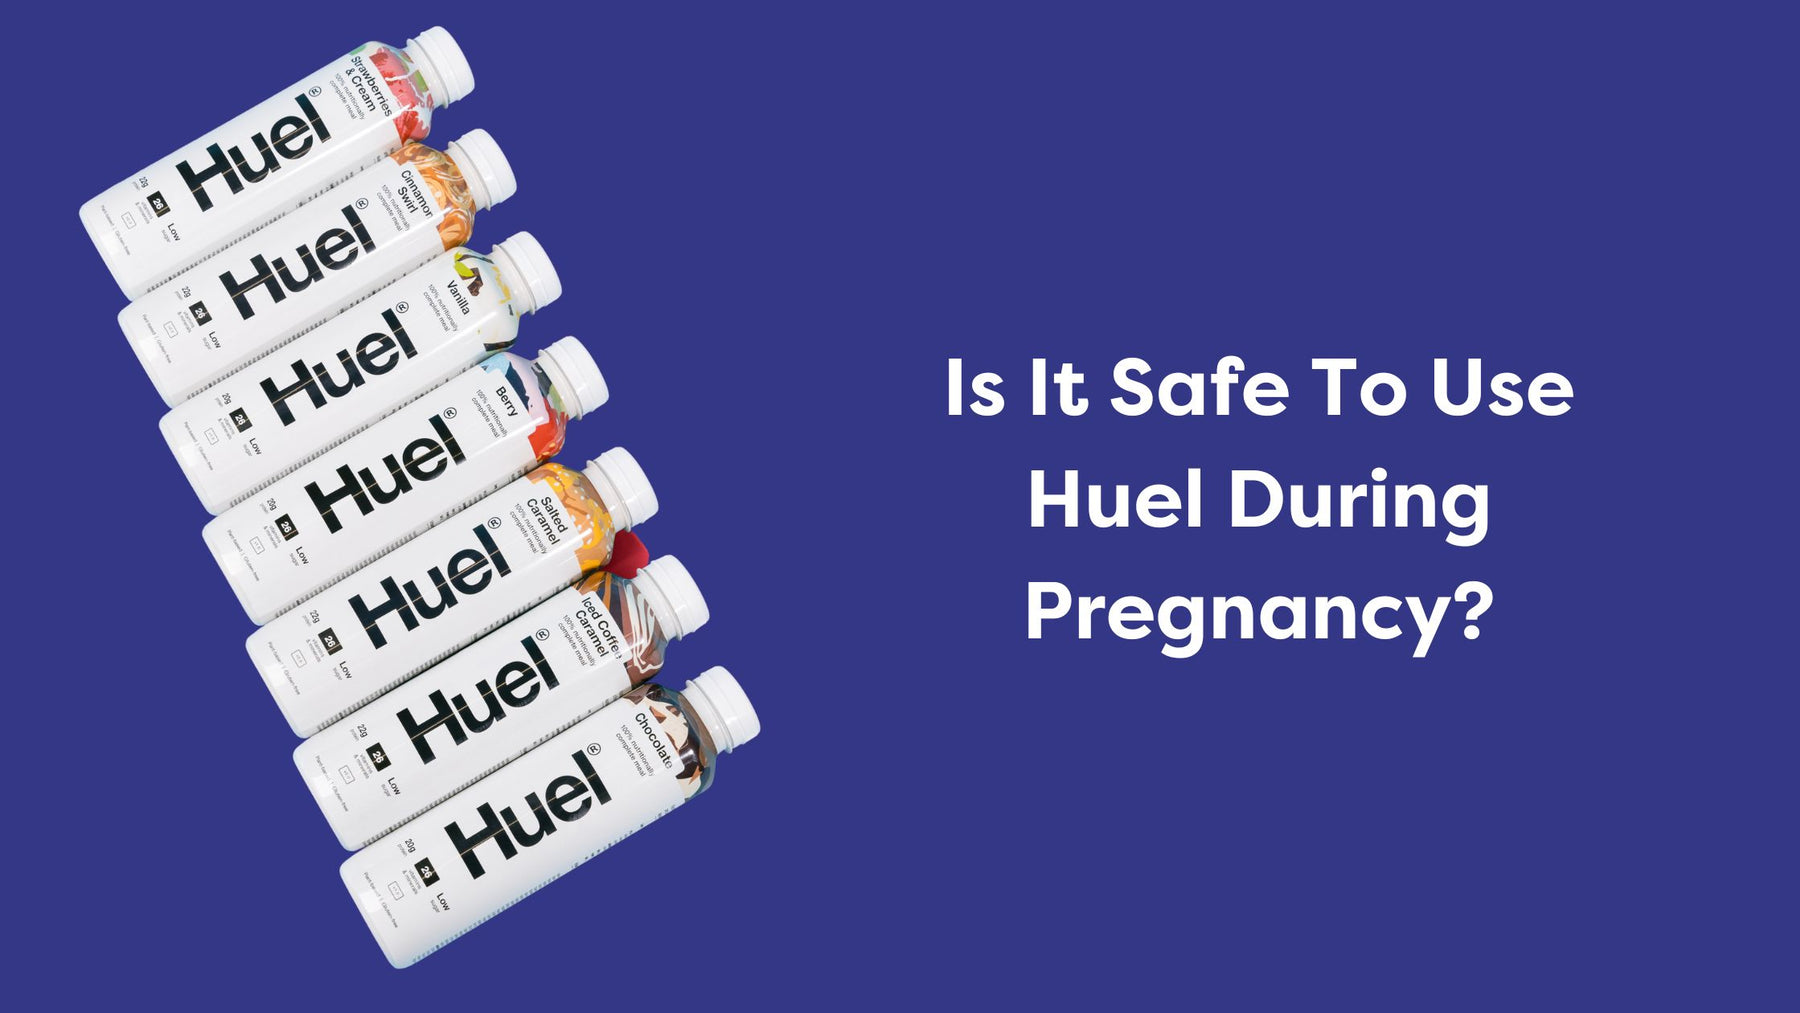 Is it Safe to Drink Huel During Pregnancy?